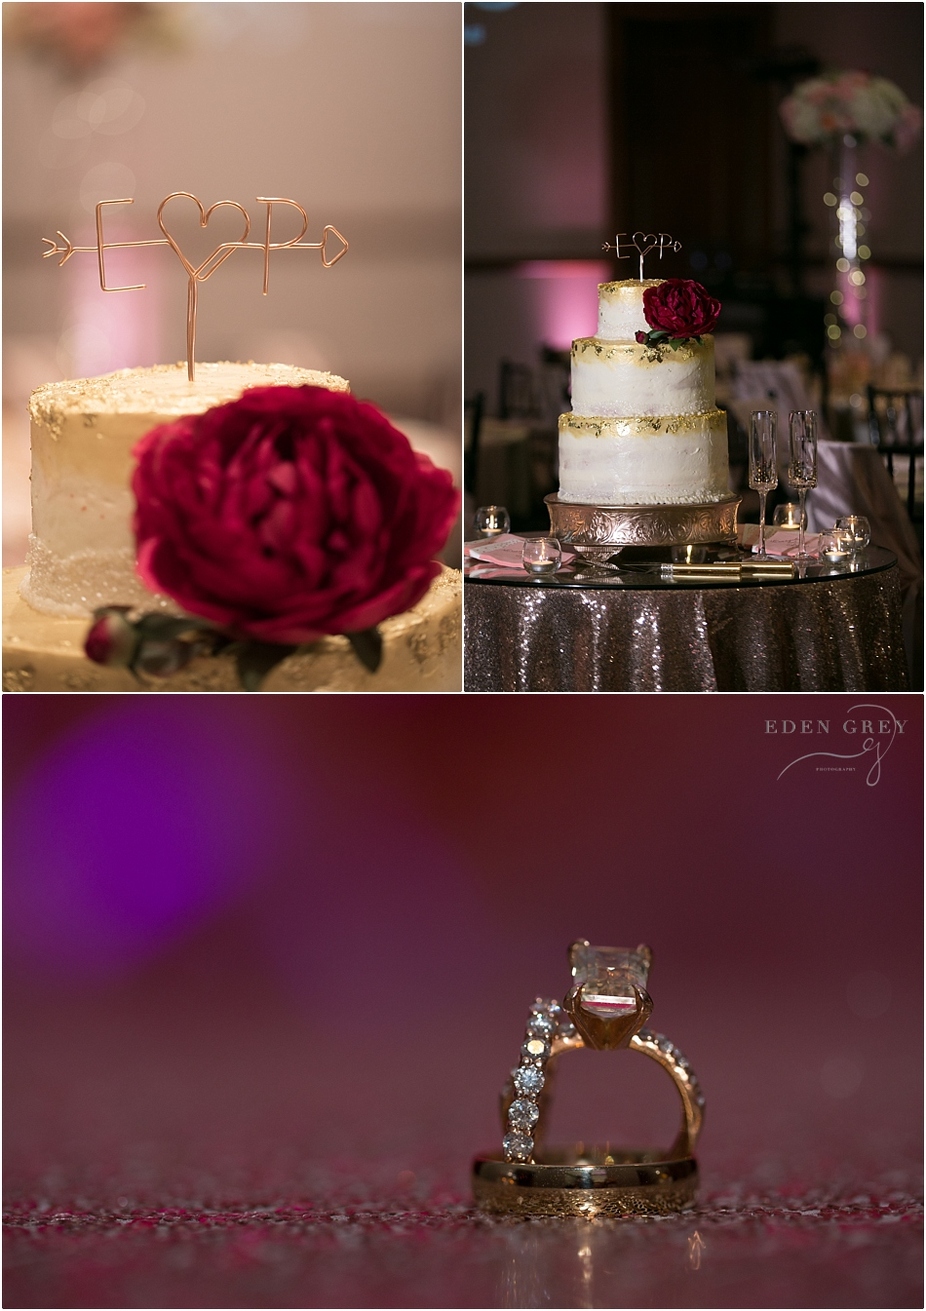 Wedding Cakes and Ring Shots